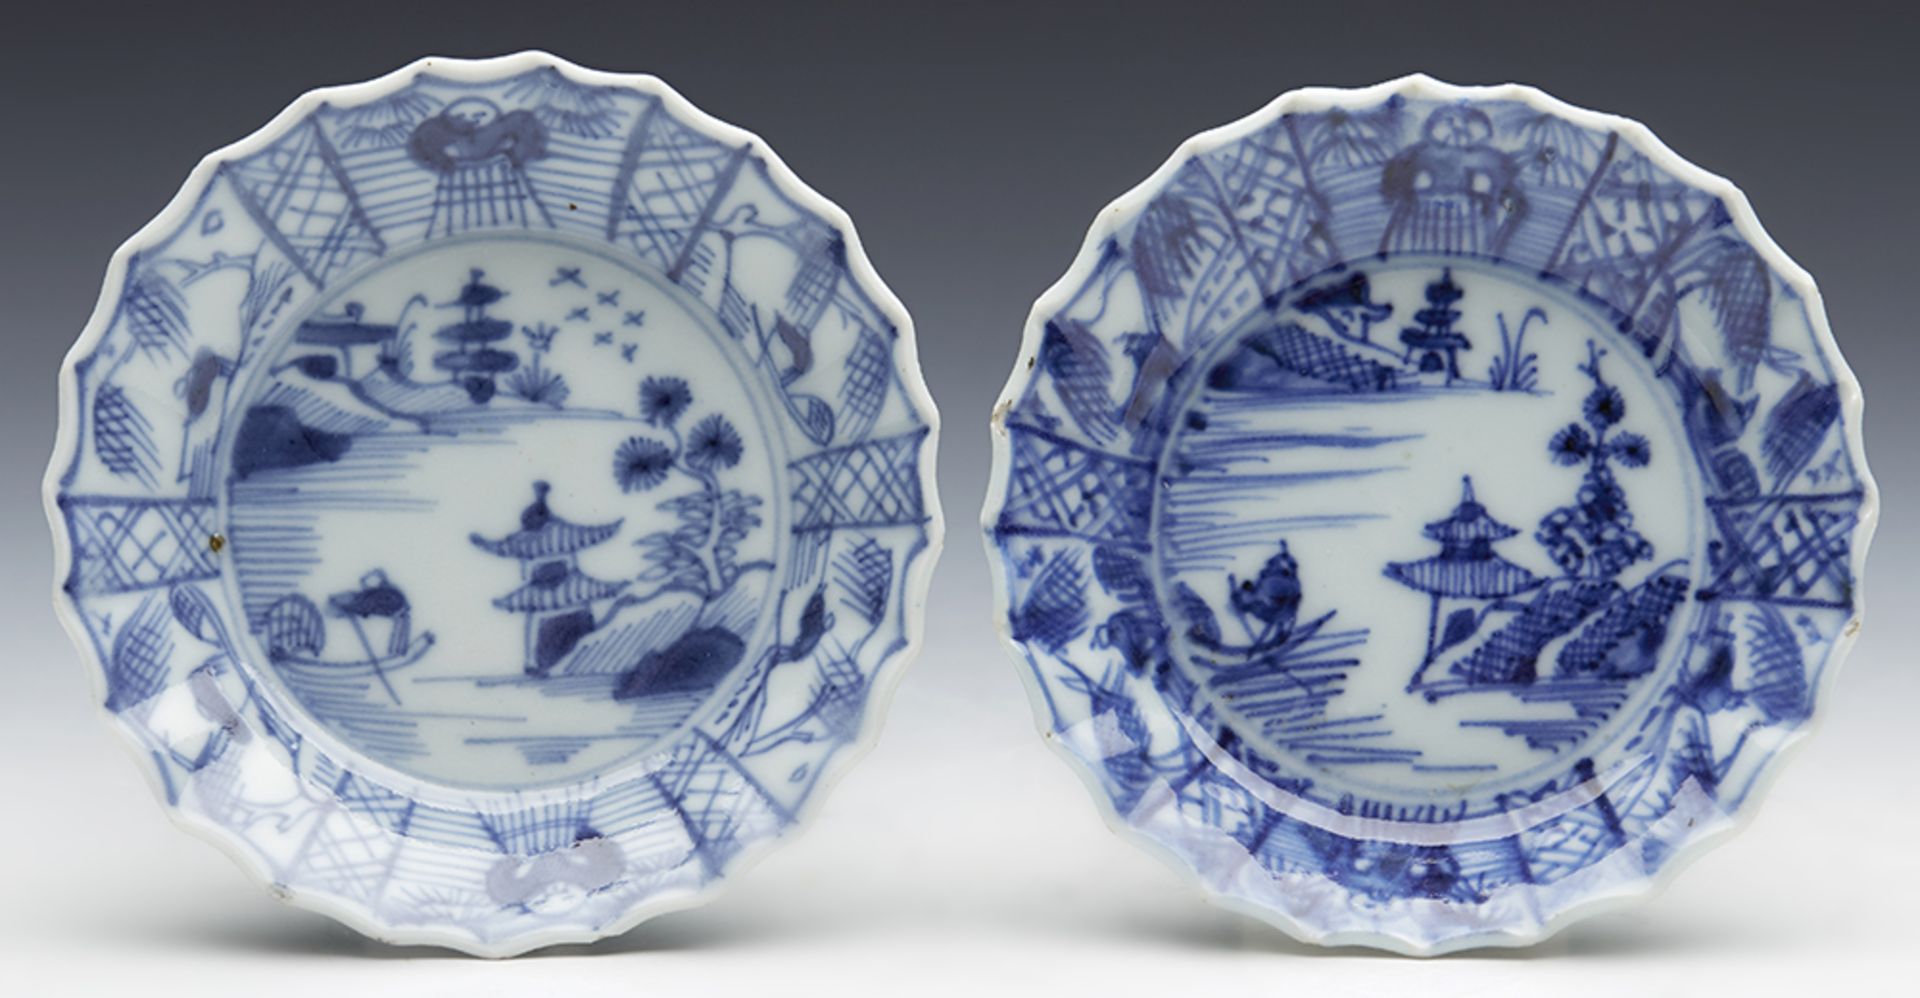 PAIR ANTIQUE CHINESE QIANLONG PICKLE DISHES WITH WATERY LANDSCAPES 18TH C.